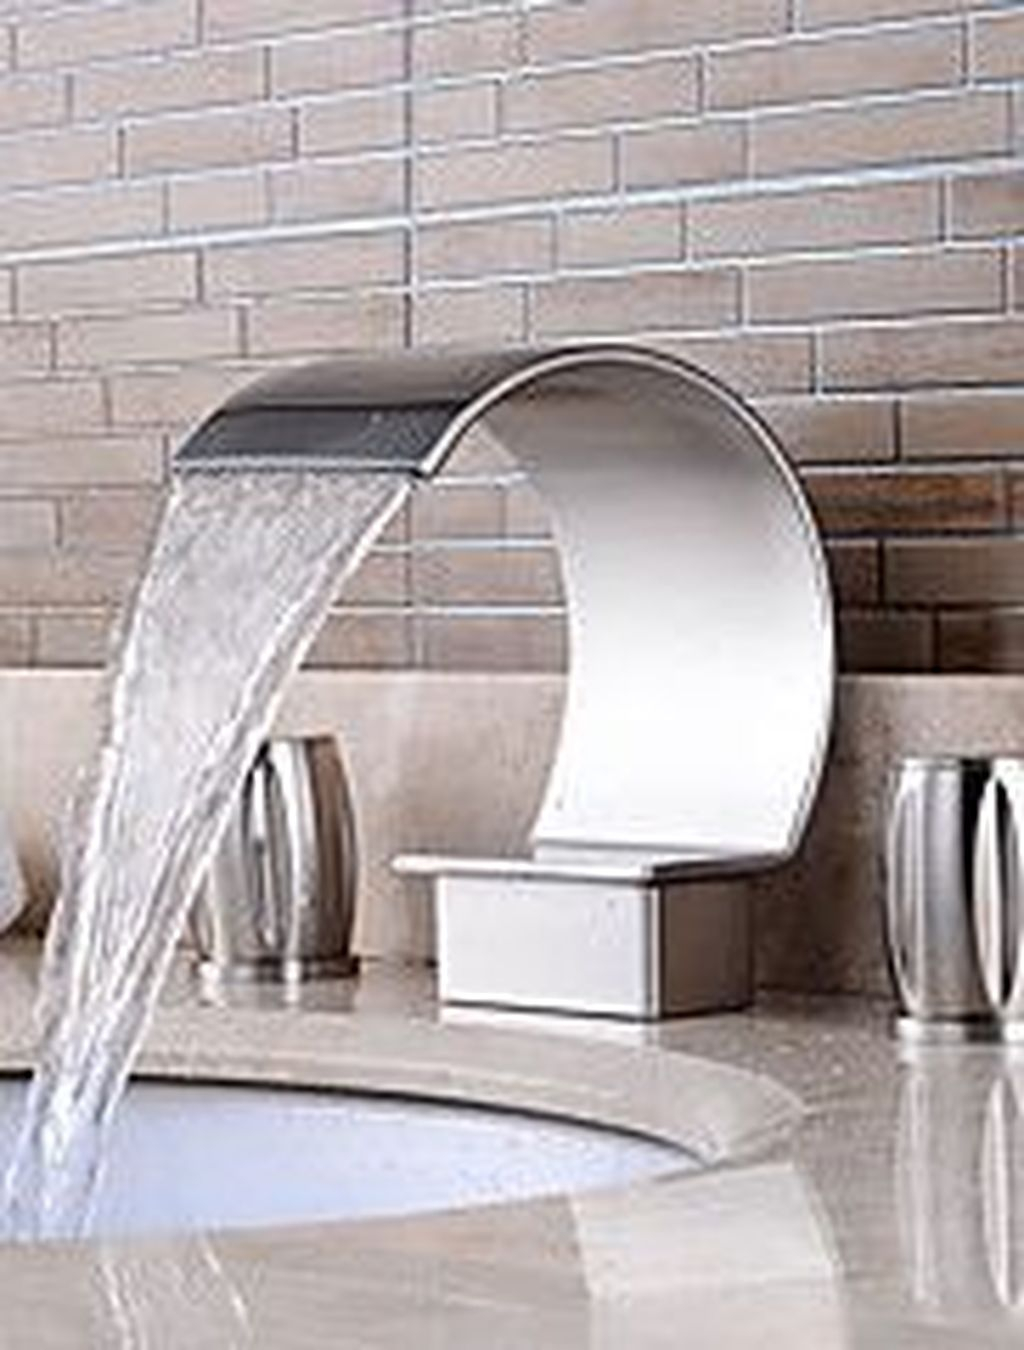 Incredible Water Faucet Design Ideas For Your Bathroom Sink33